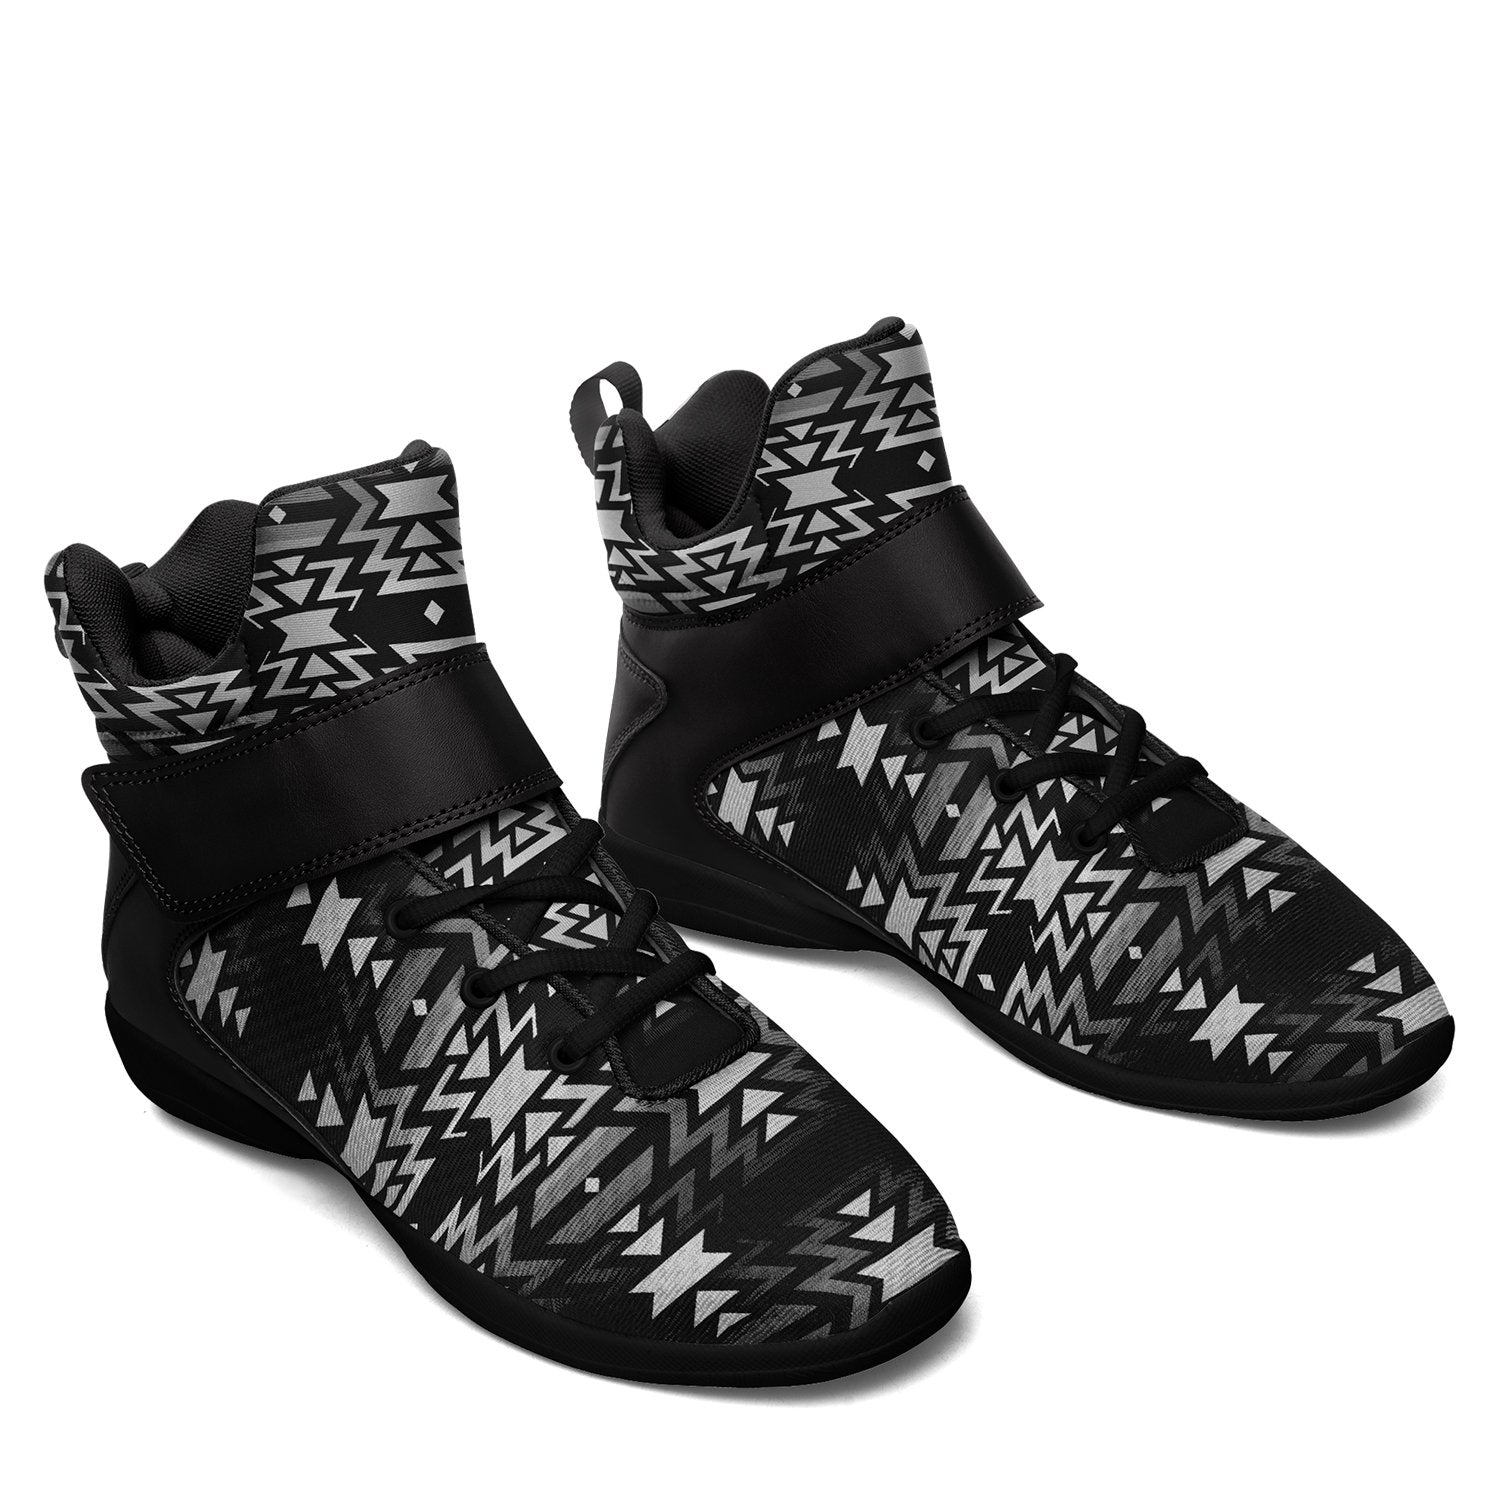 Black Fire Black and White Ipottaa Basketball / Sport High Top Shoes 49 Dzine 